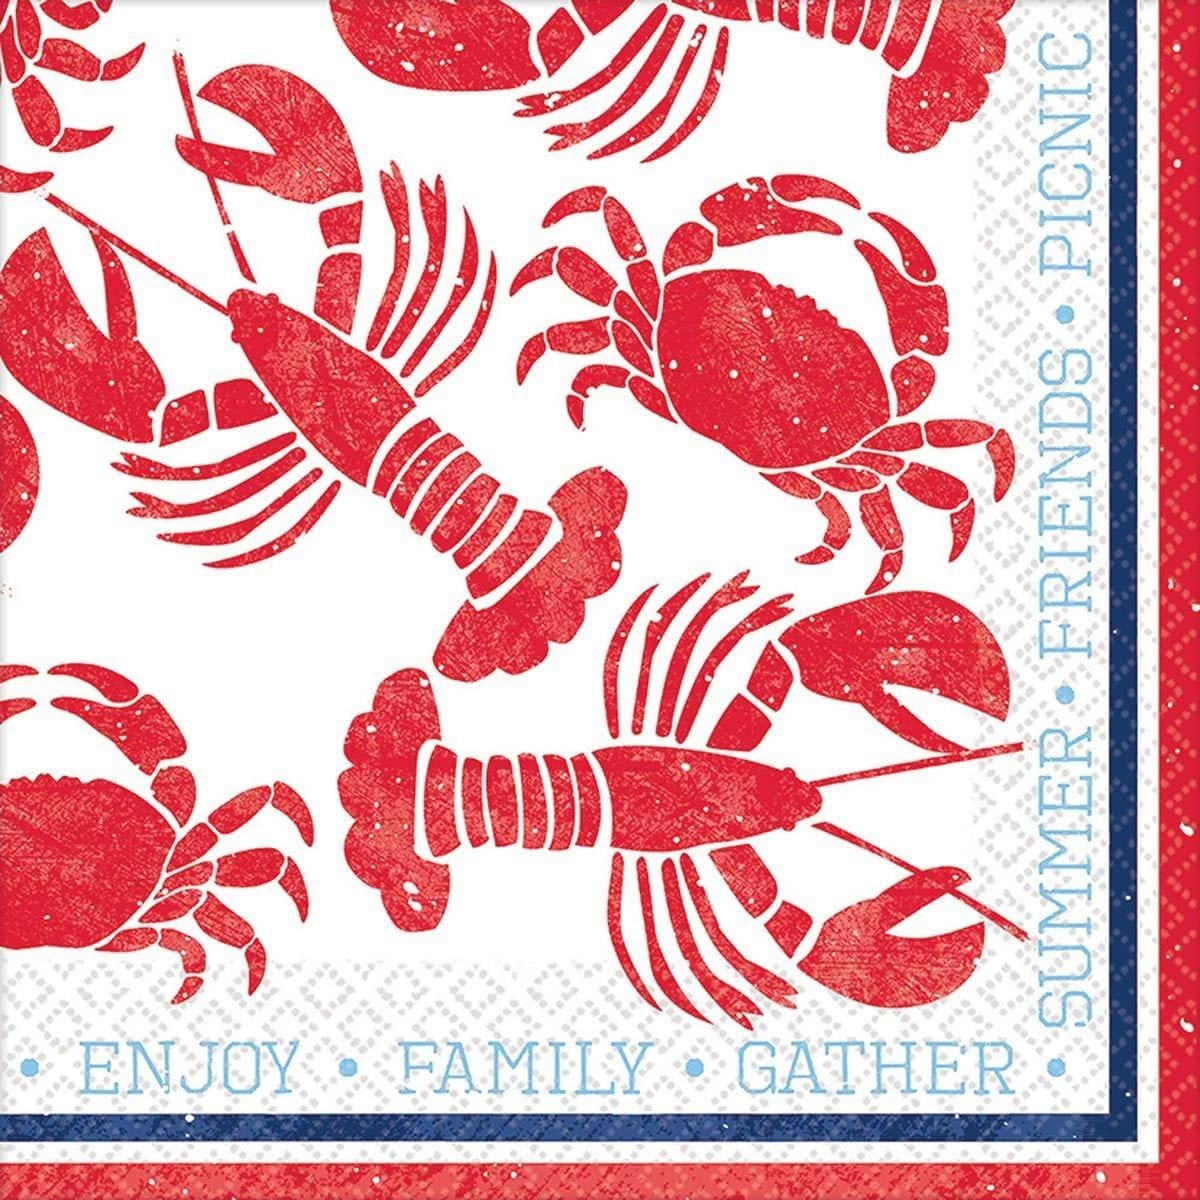 Buy Theme Party Seafood Lunch Napkins, 16 per Package sold at Party Expert